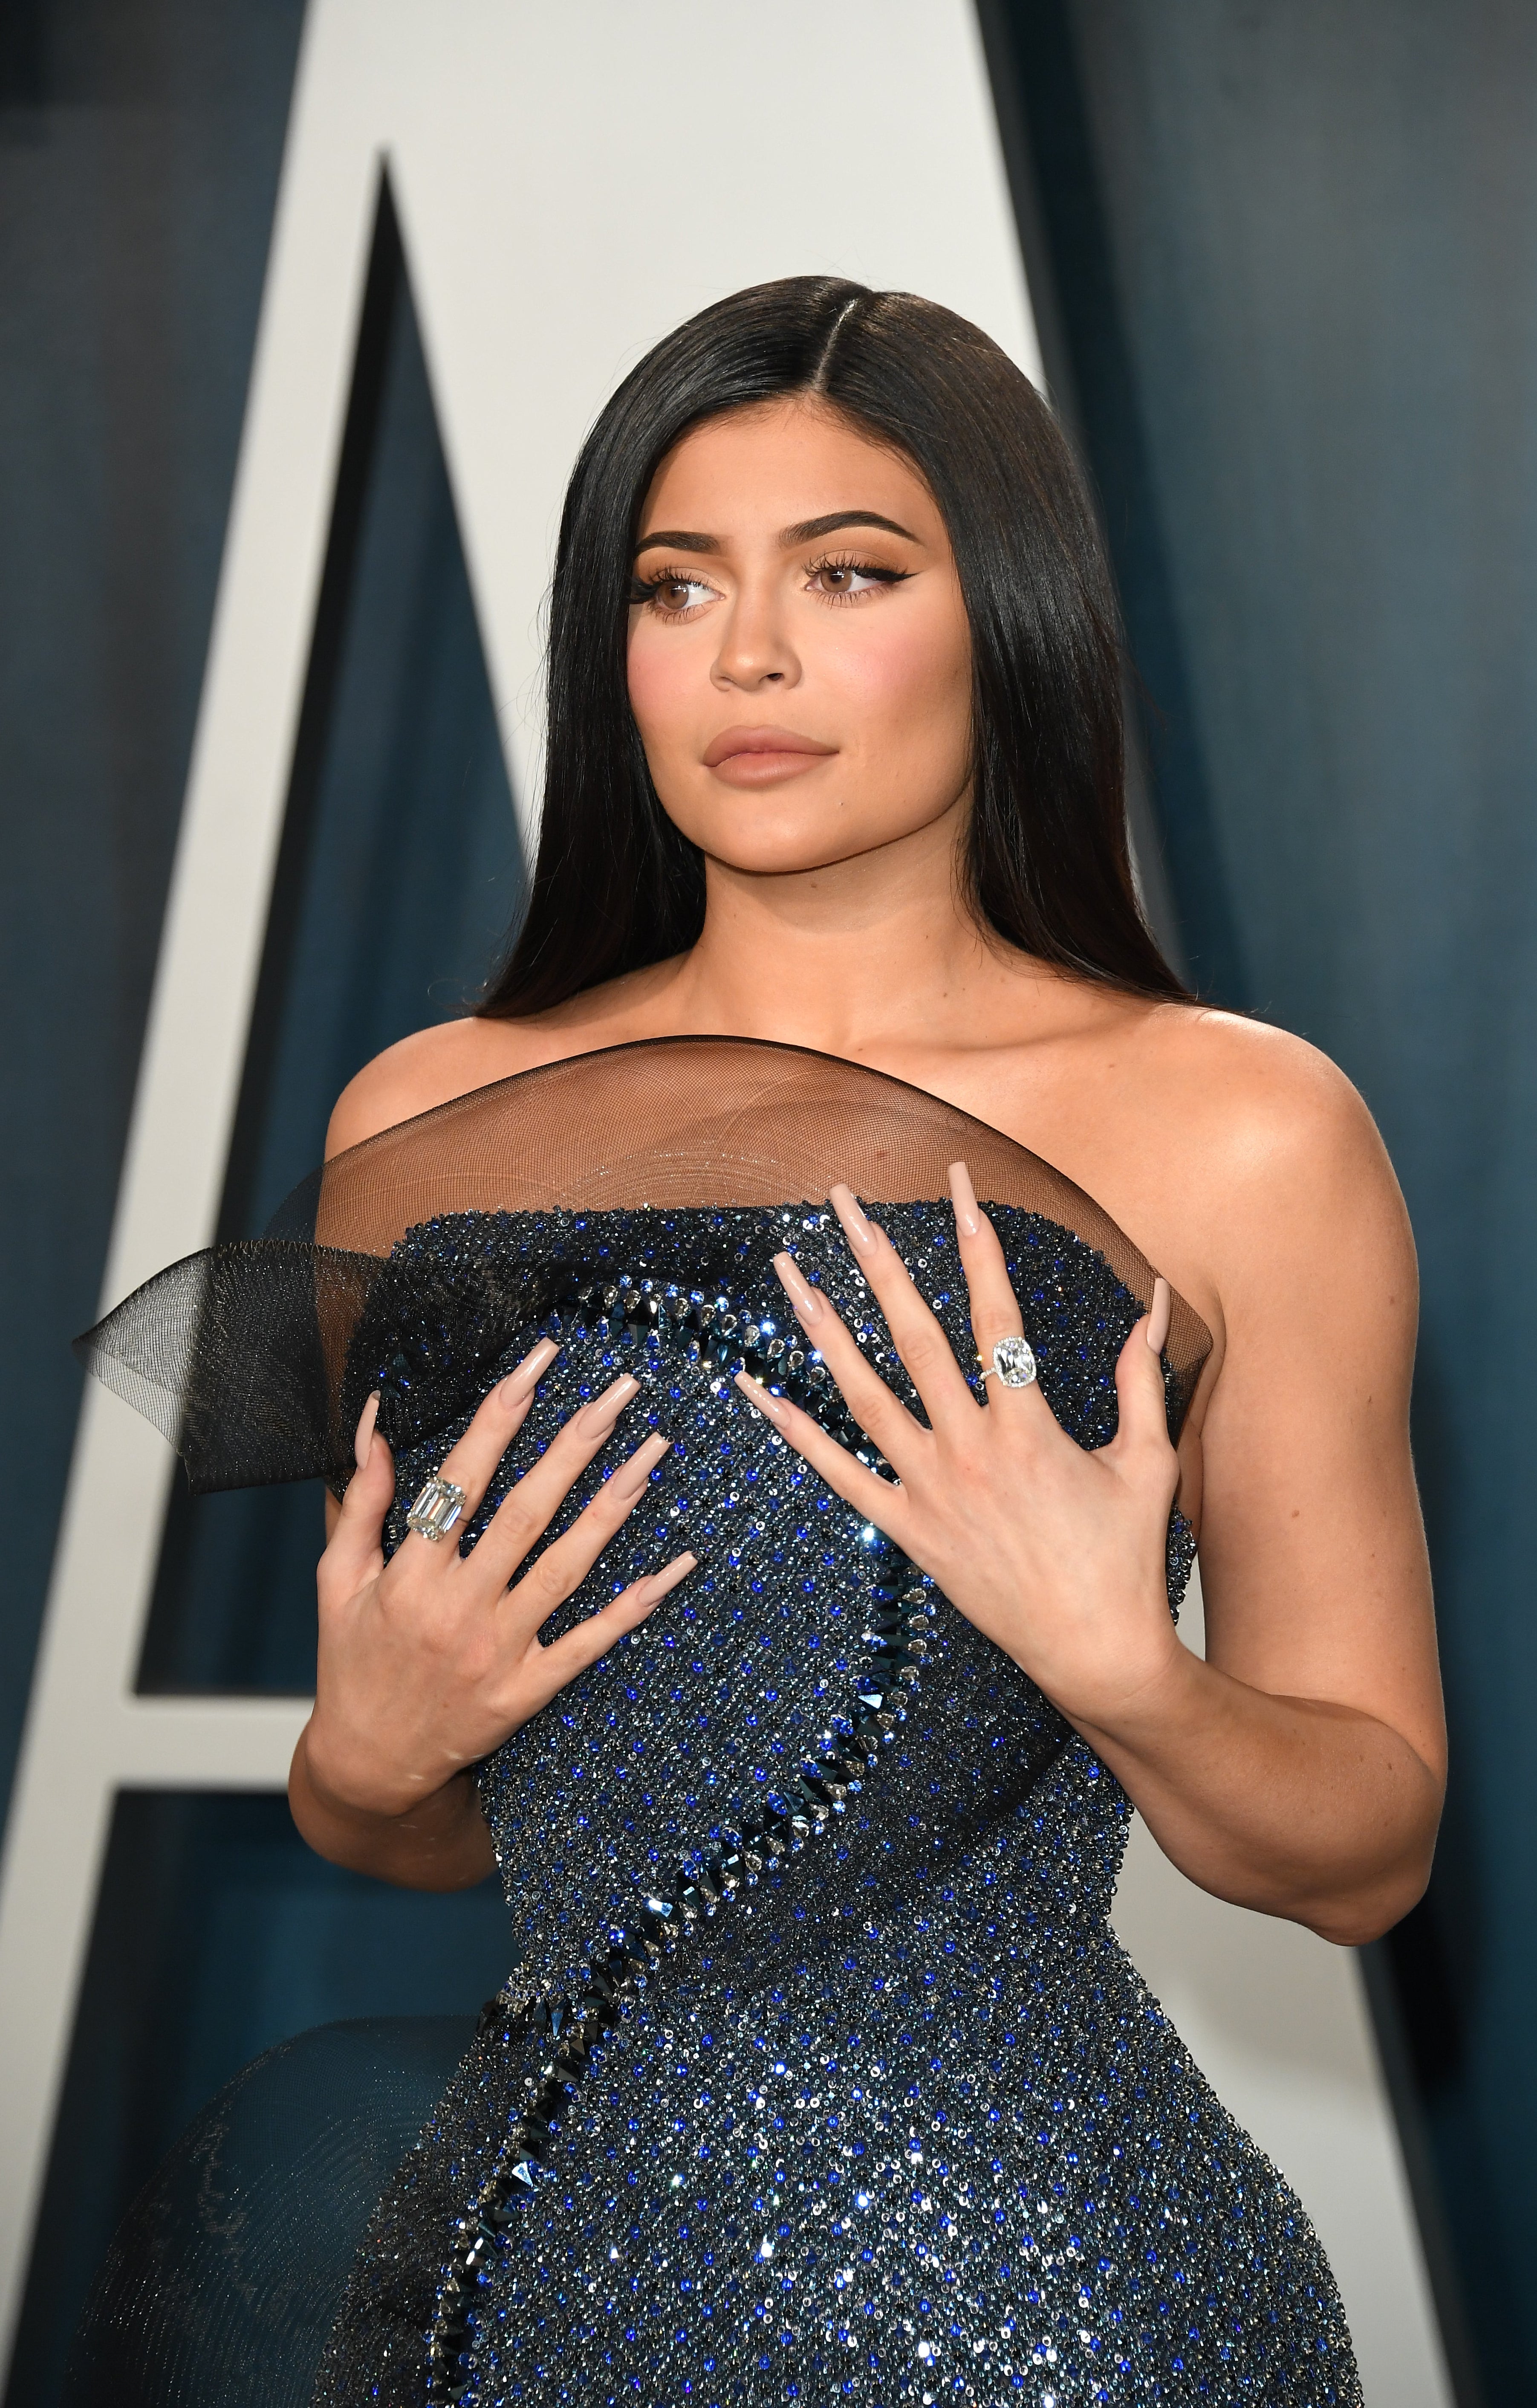 Close-up of Kylie at a media event